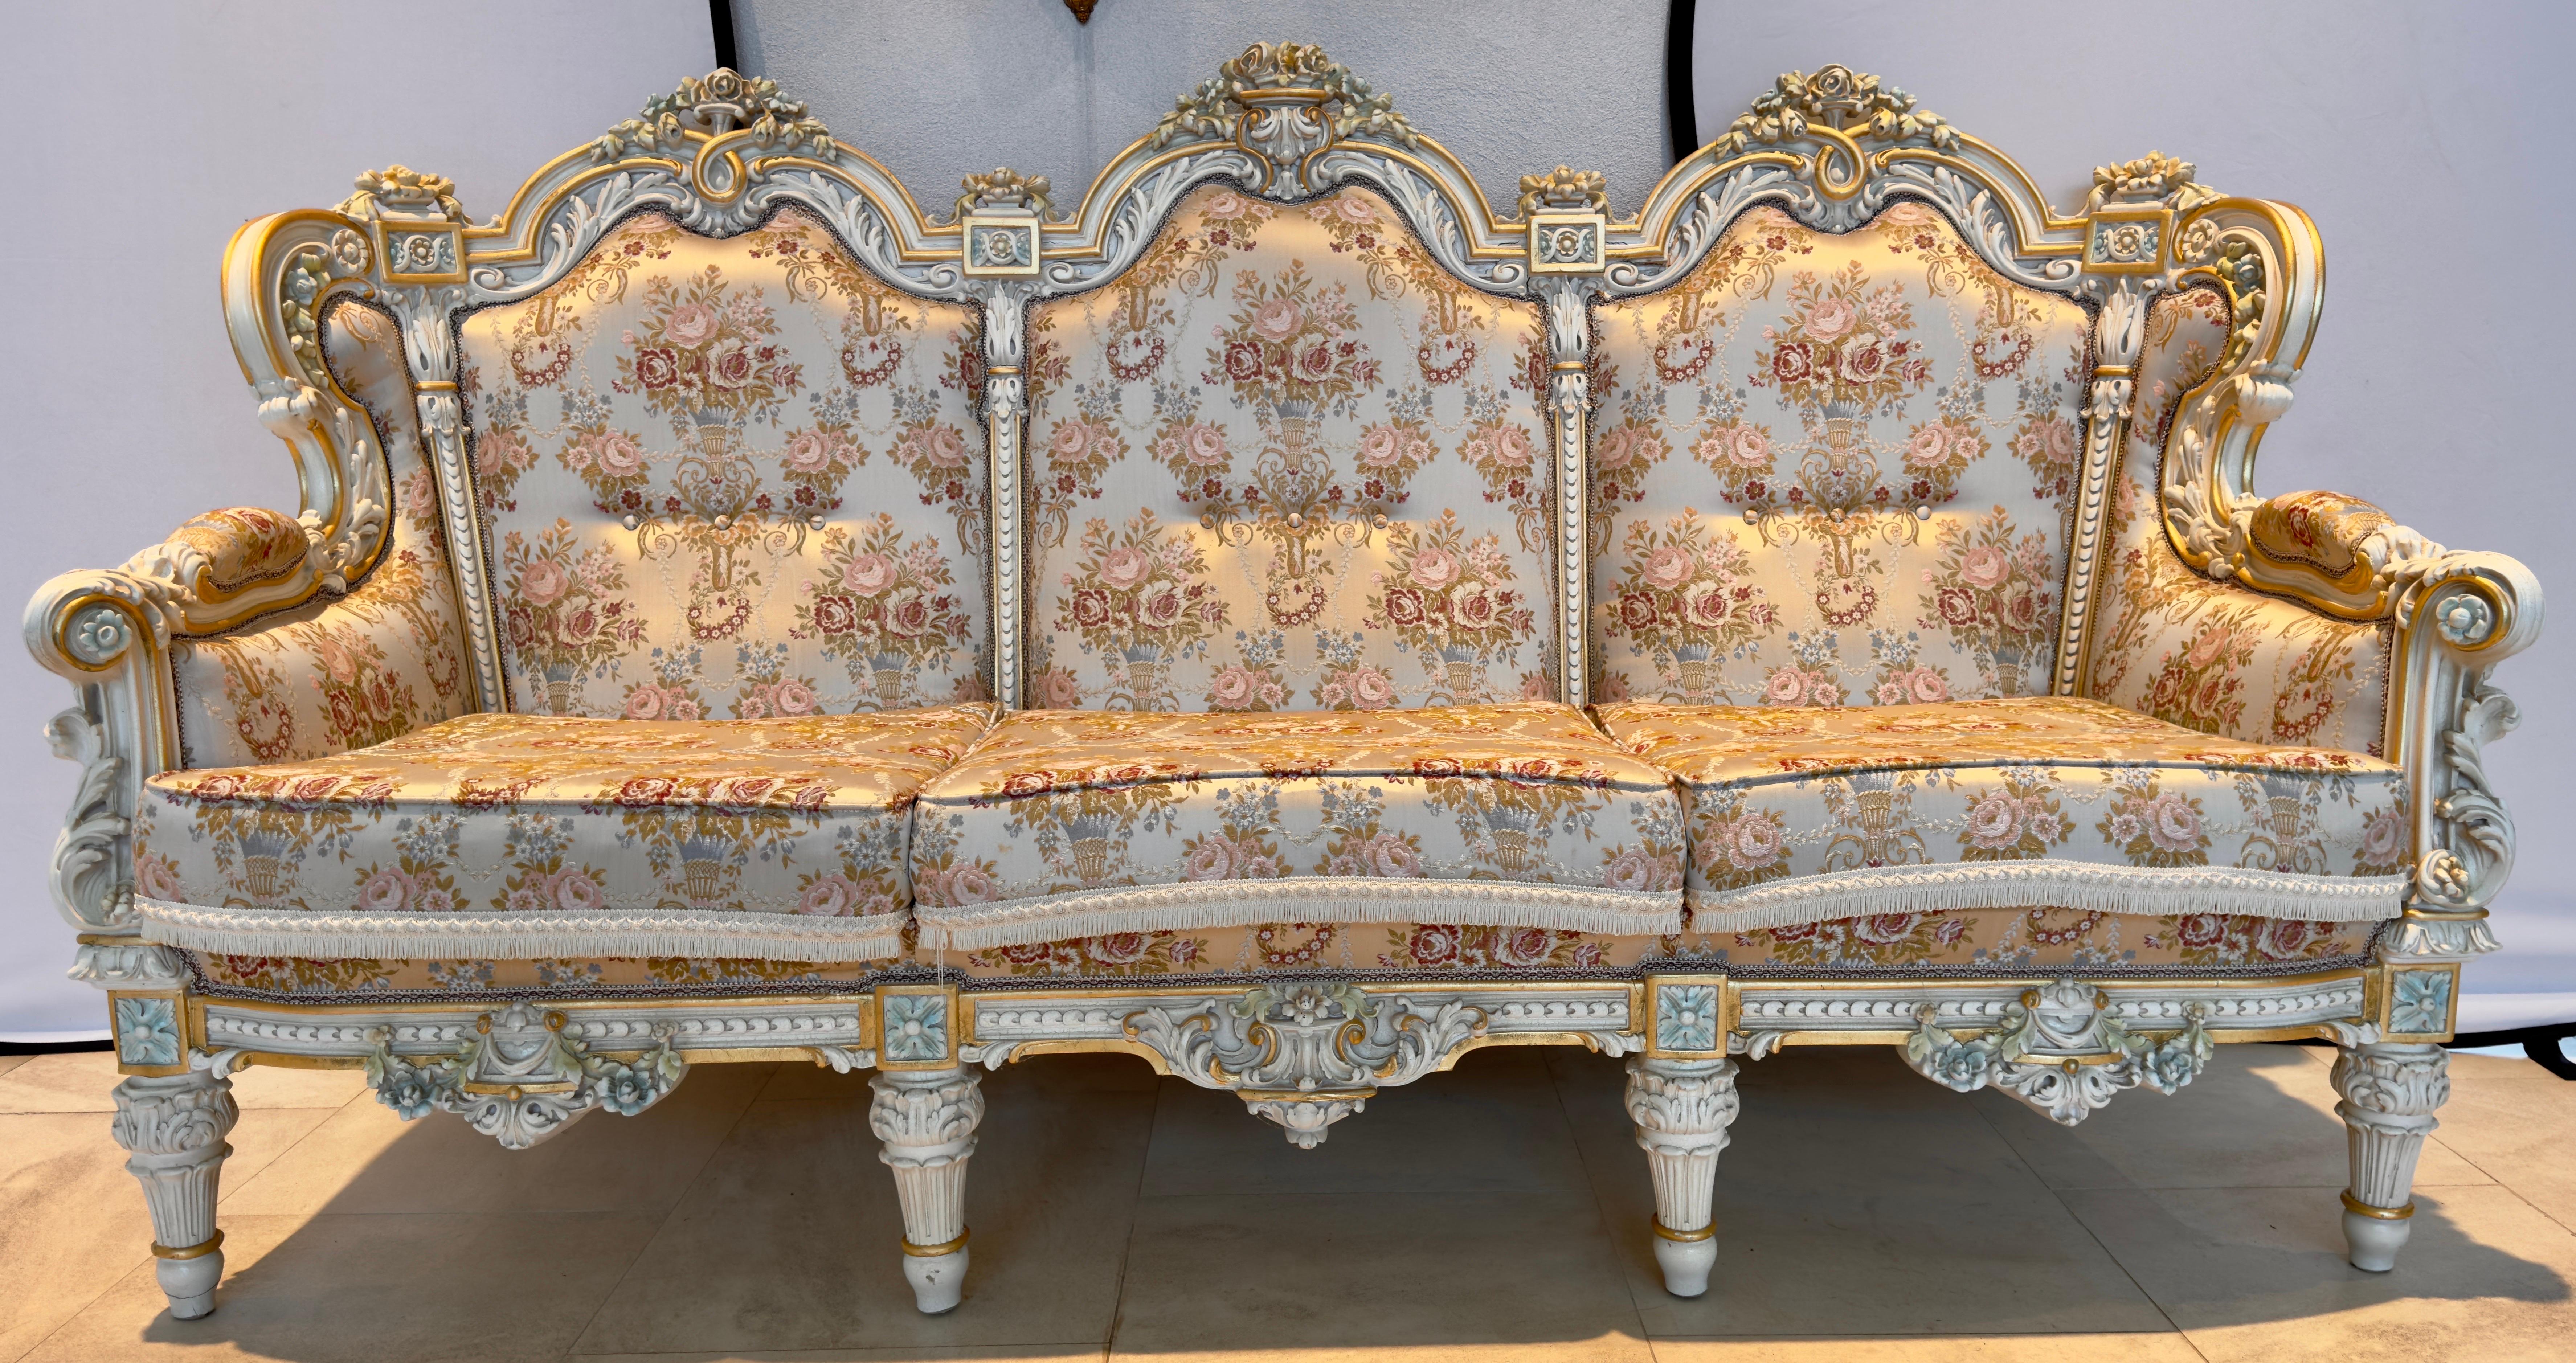 Italian Neoclassical Baroque Style Sofa with fine floral silk upholstery  For Sale 1